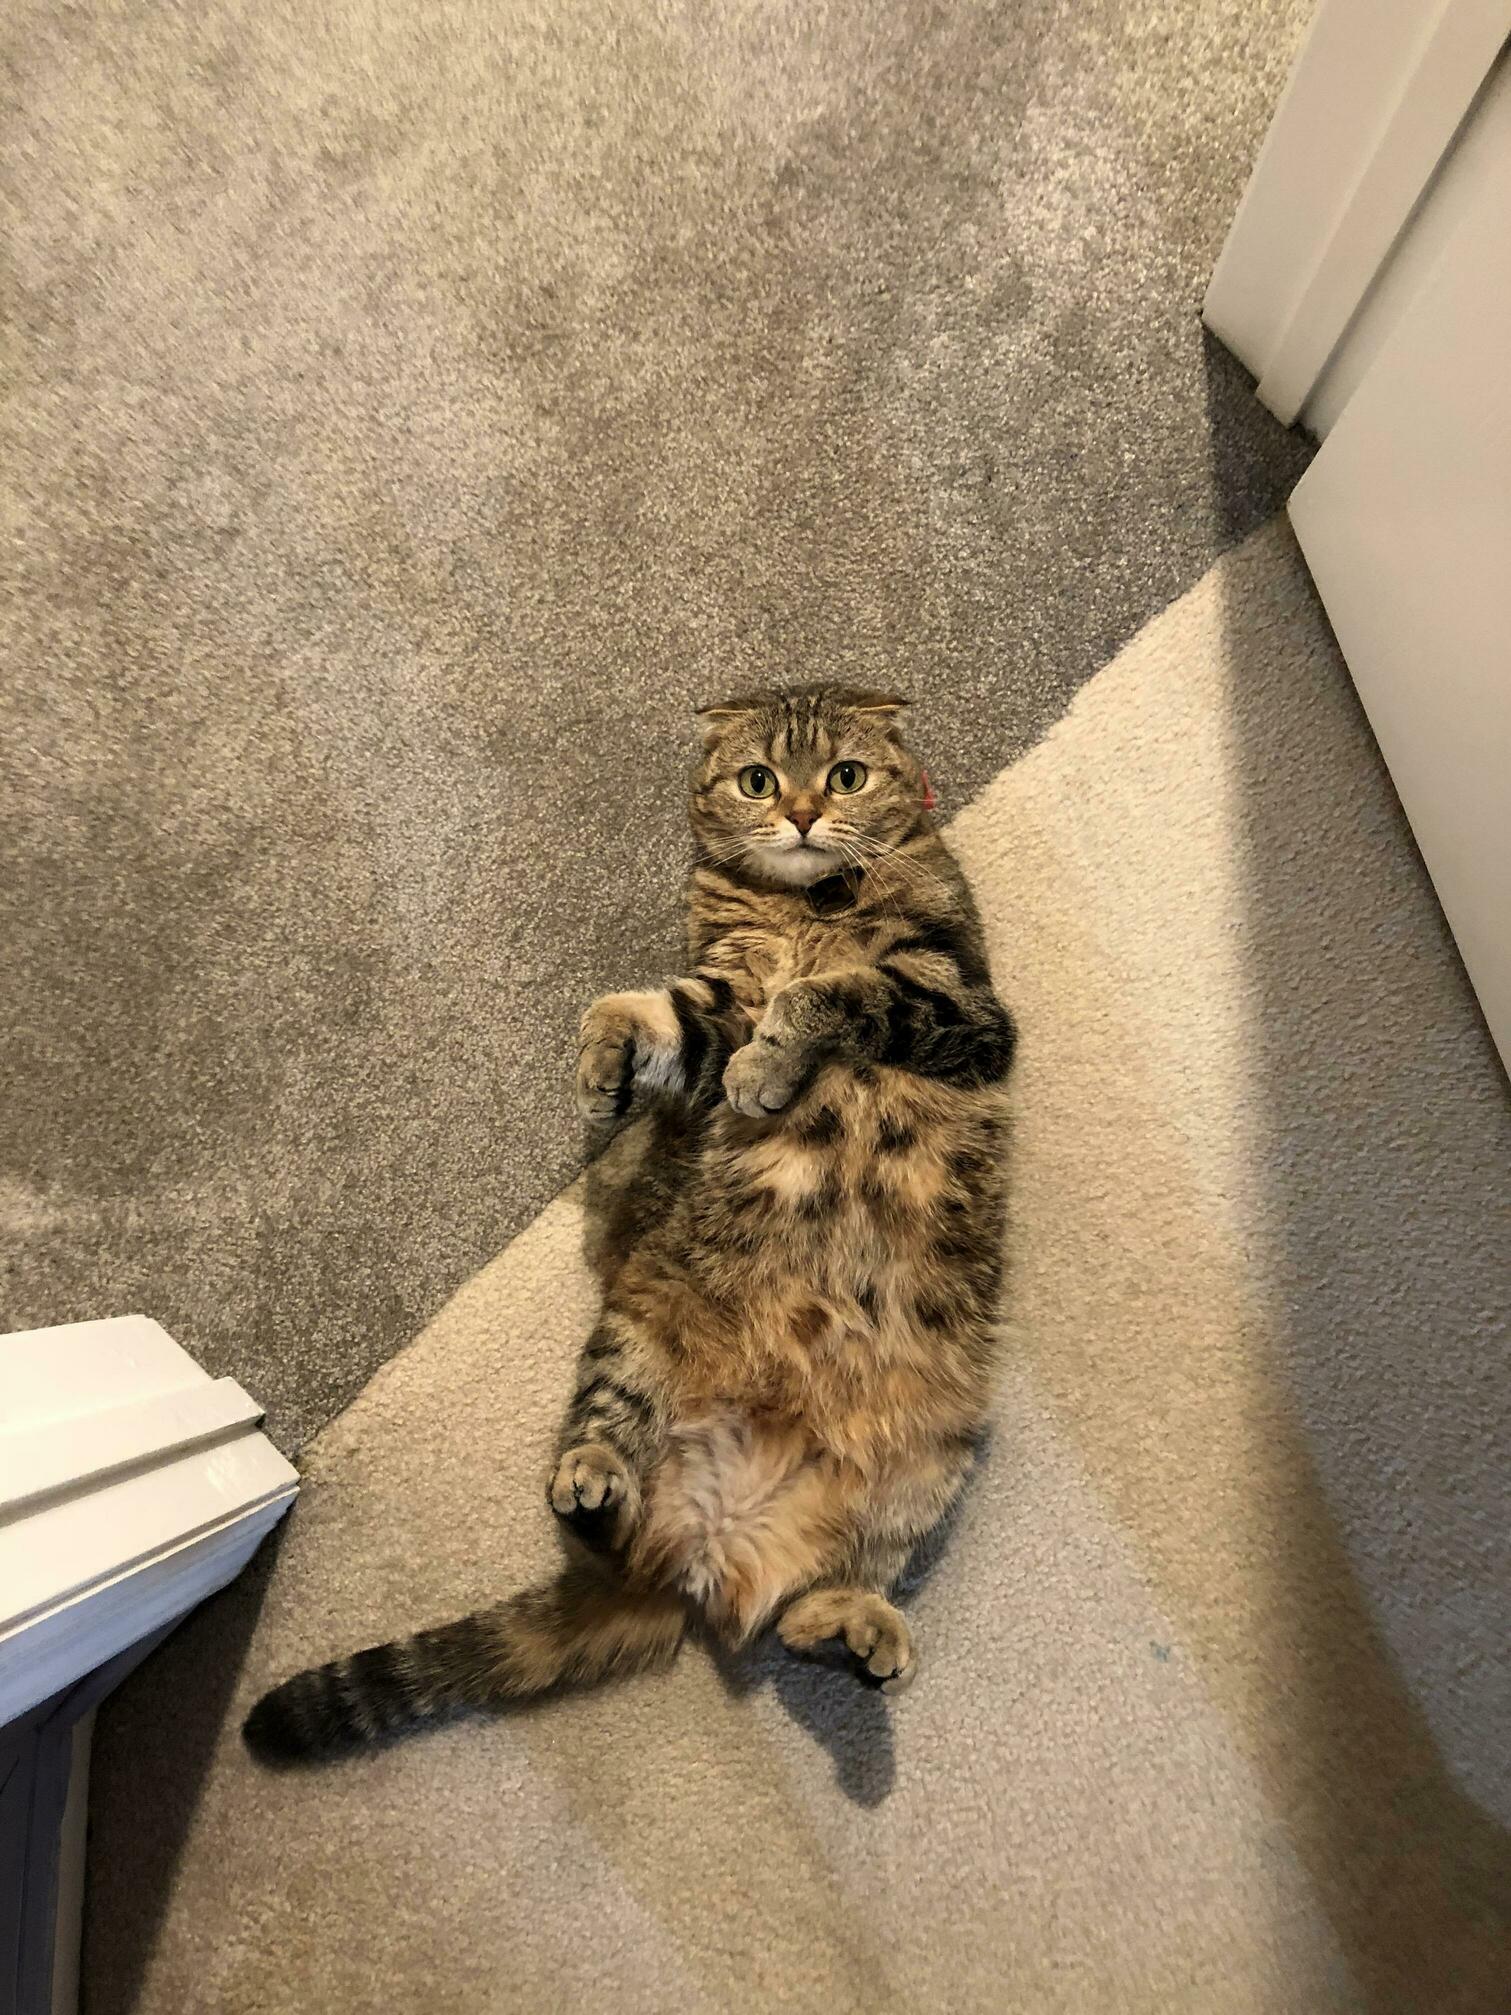 Please dont touch my belly while im exposed!